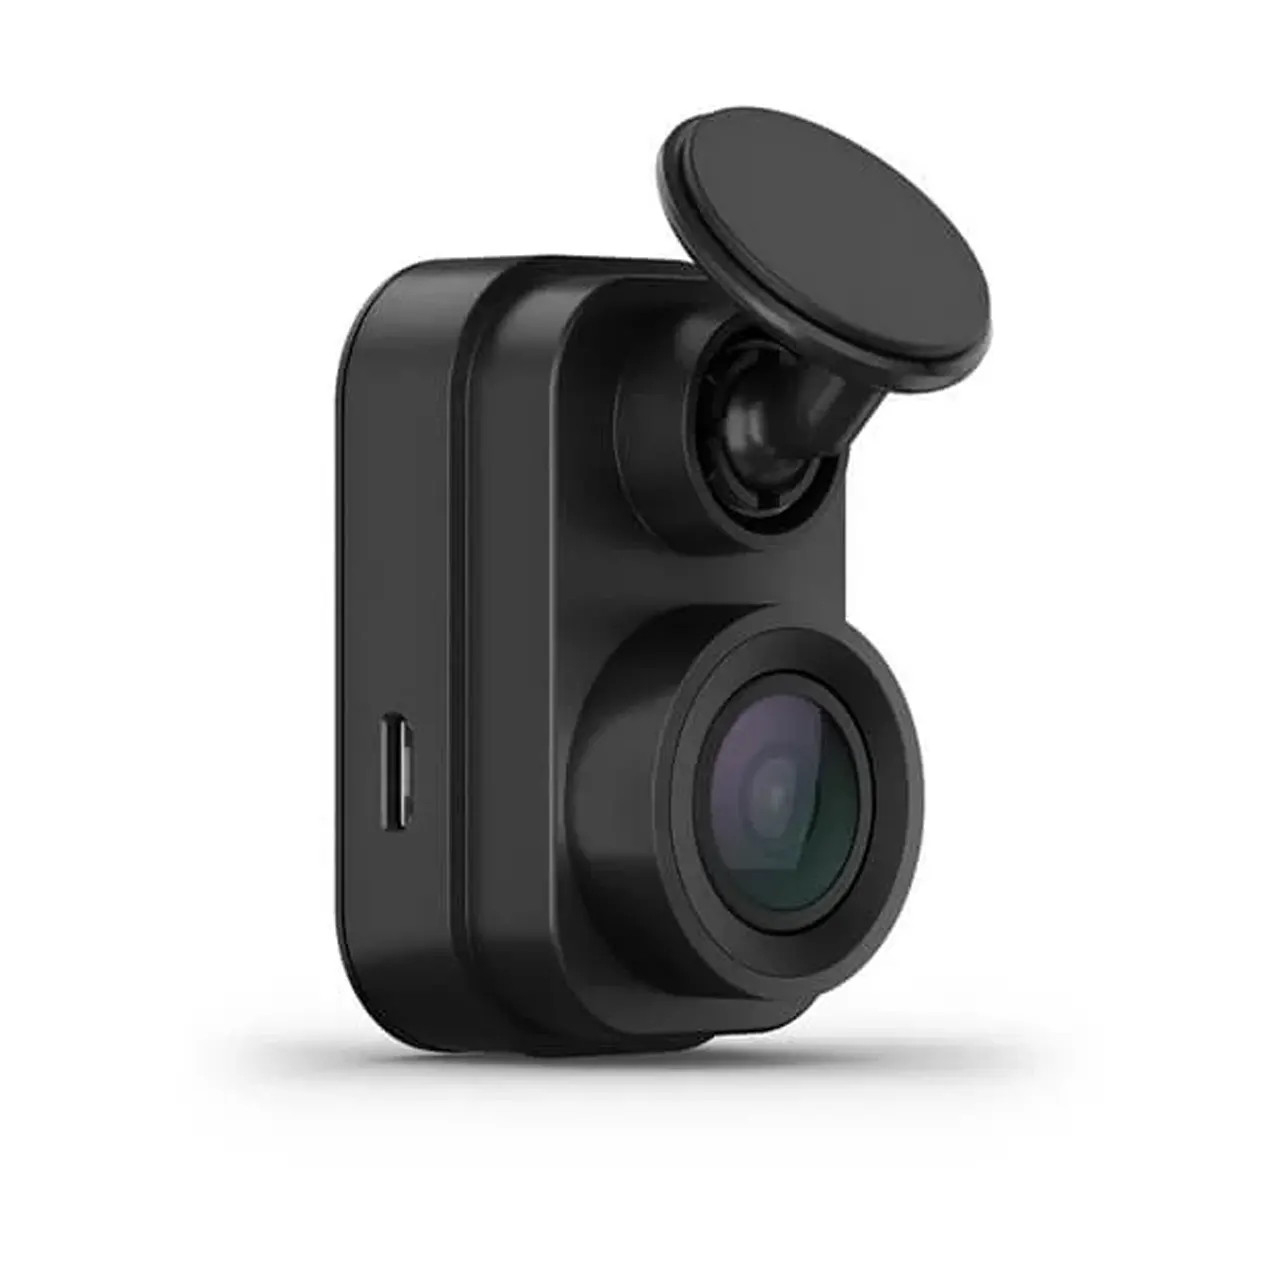 Garmin Dash Cam Mini 2 - 1080p Tiny Dash Cam with a 140-degree Field of View - Your Vehicle While Away - Control - EZEE.com: High-end made